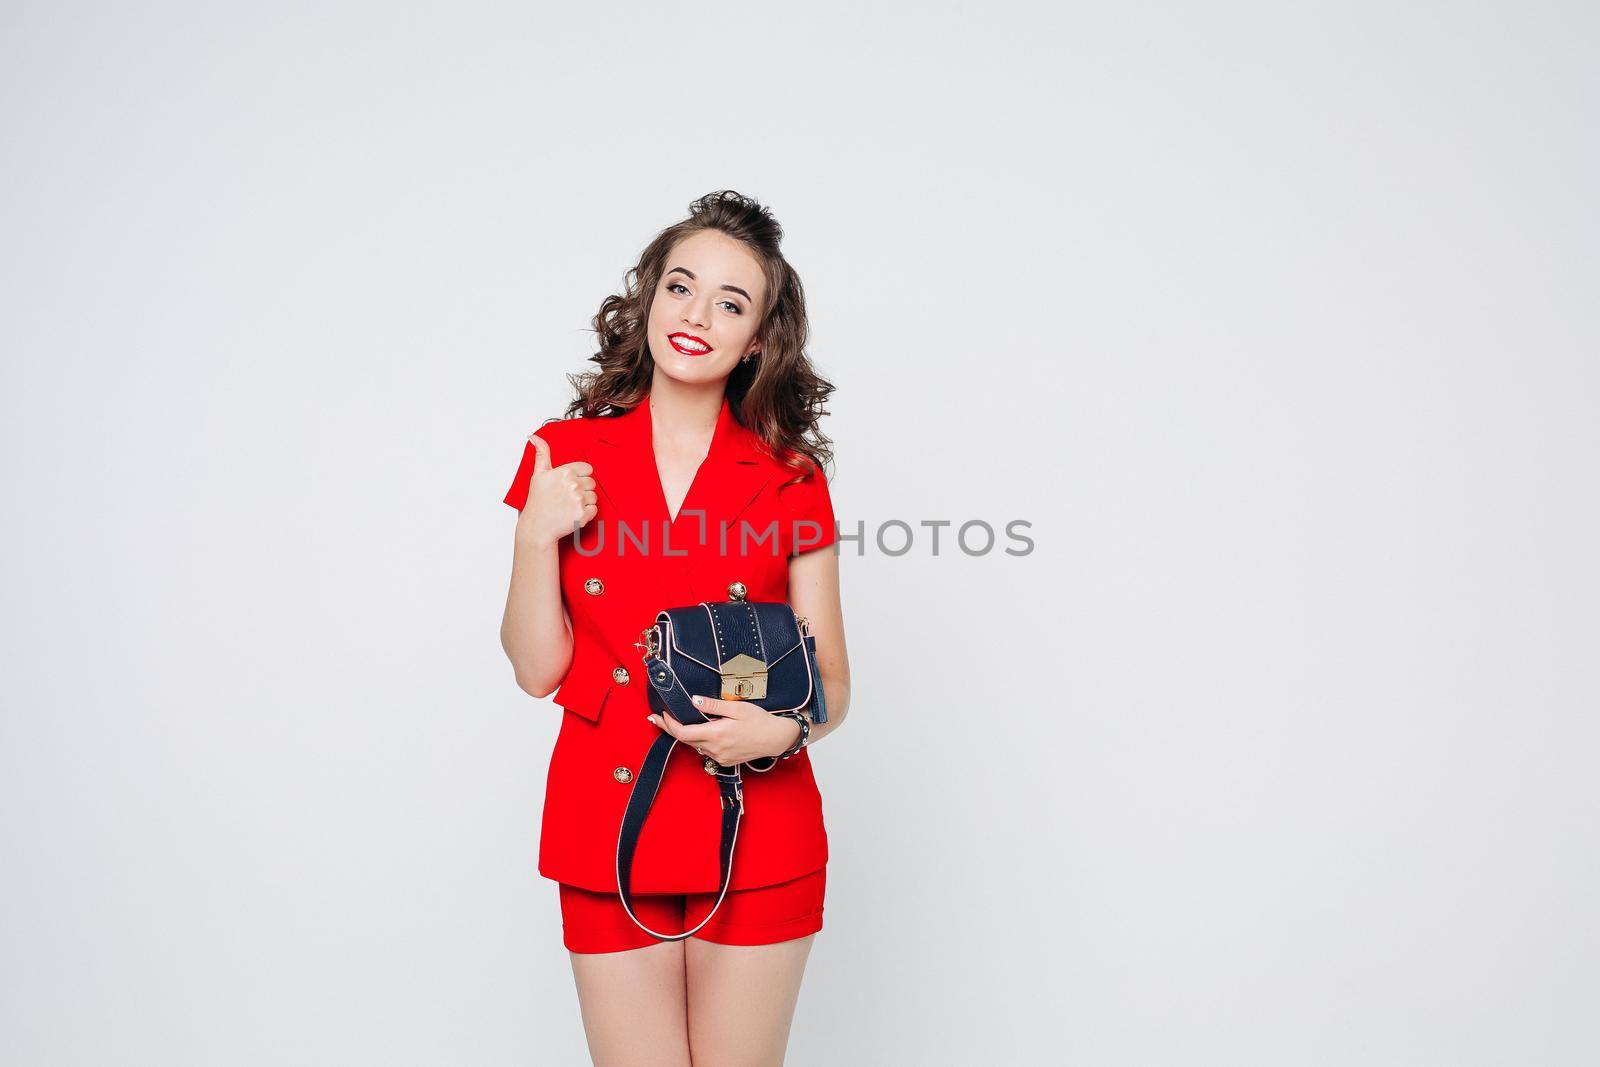 Studio portrait of attractive smiling woman with hairstyle and make up wearing bright red suit and holding trendy blue leather crossbag, showing thumb up with toothy smile. Isolated on white.